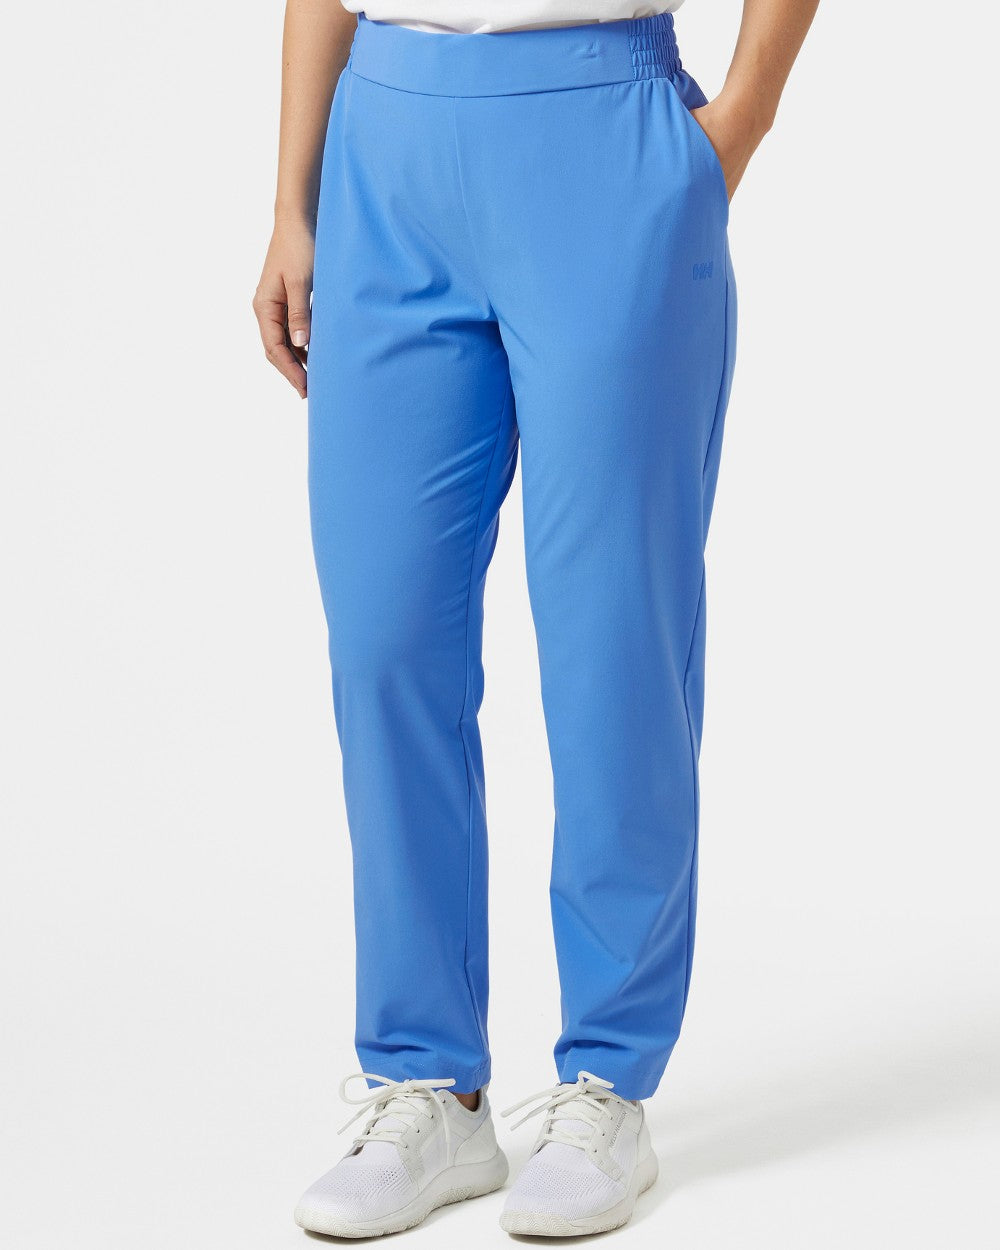 Ultra Blue coloured Helly Hansen Womens Thalia Pant 2.0 on grey background 